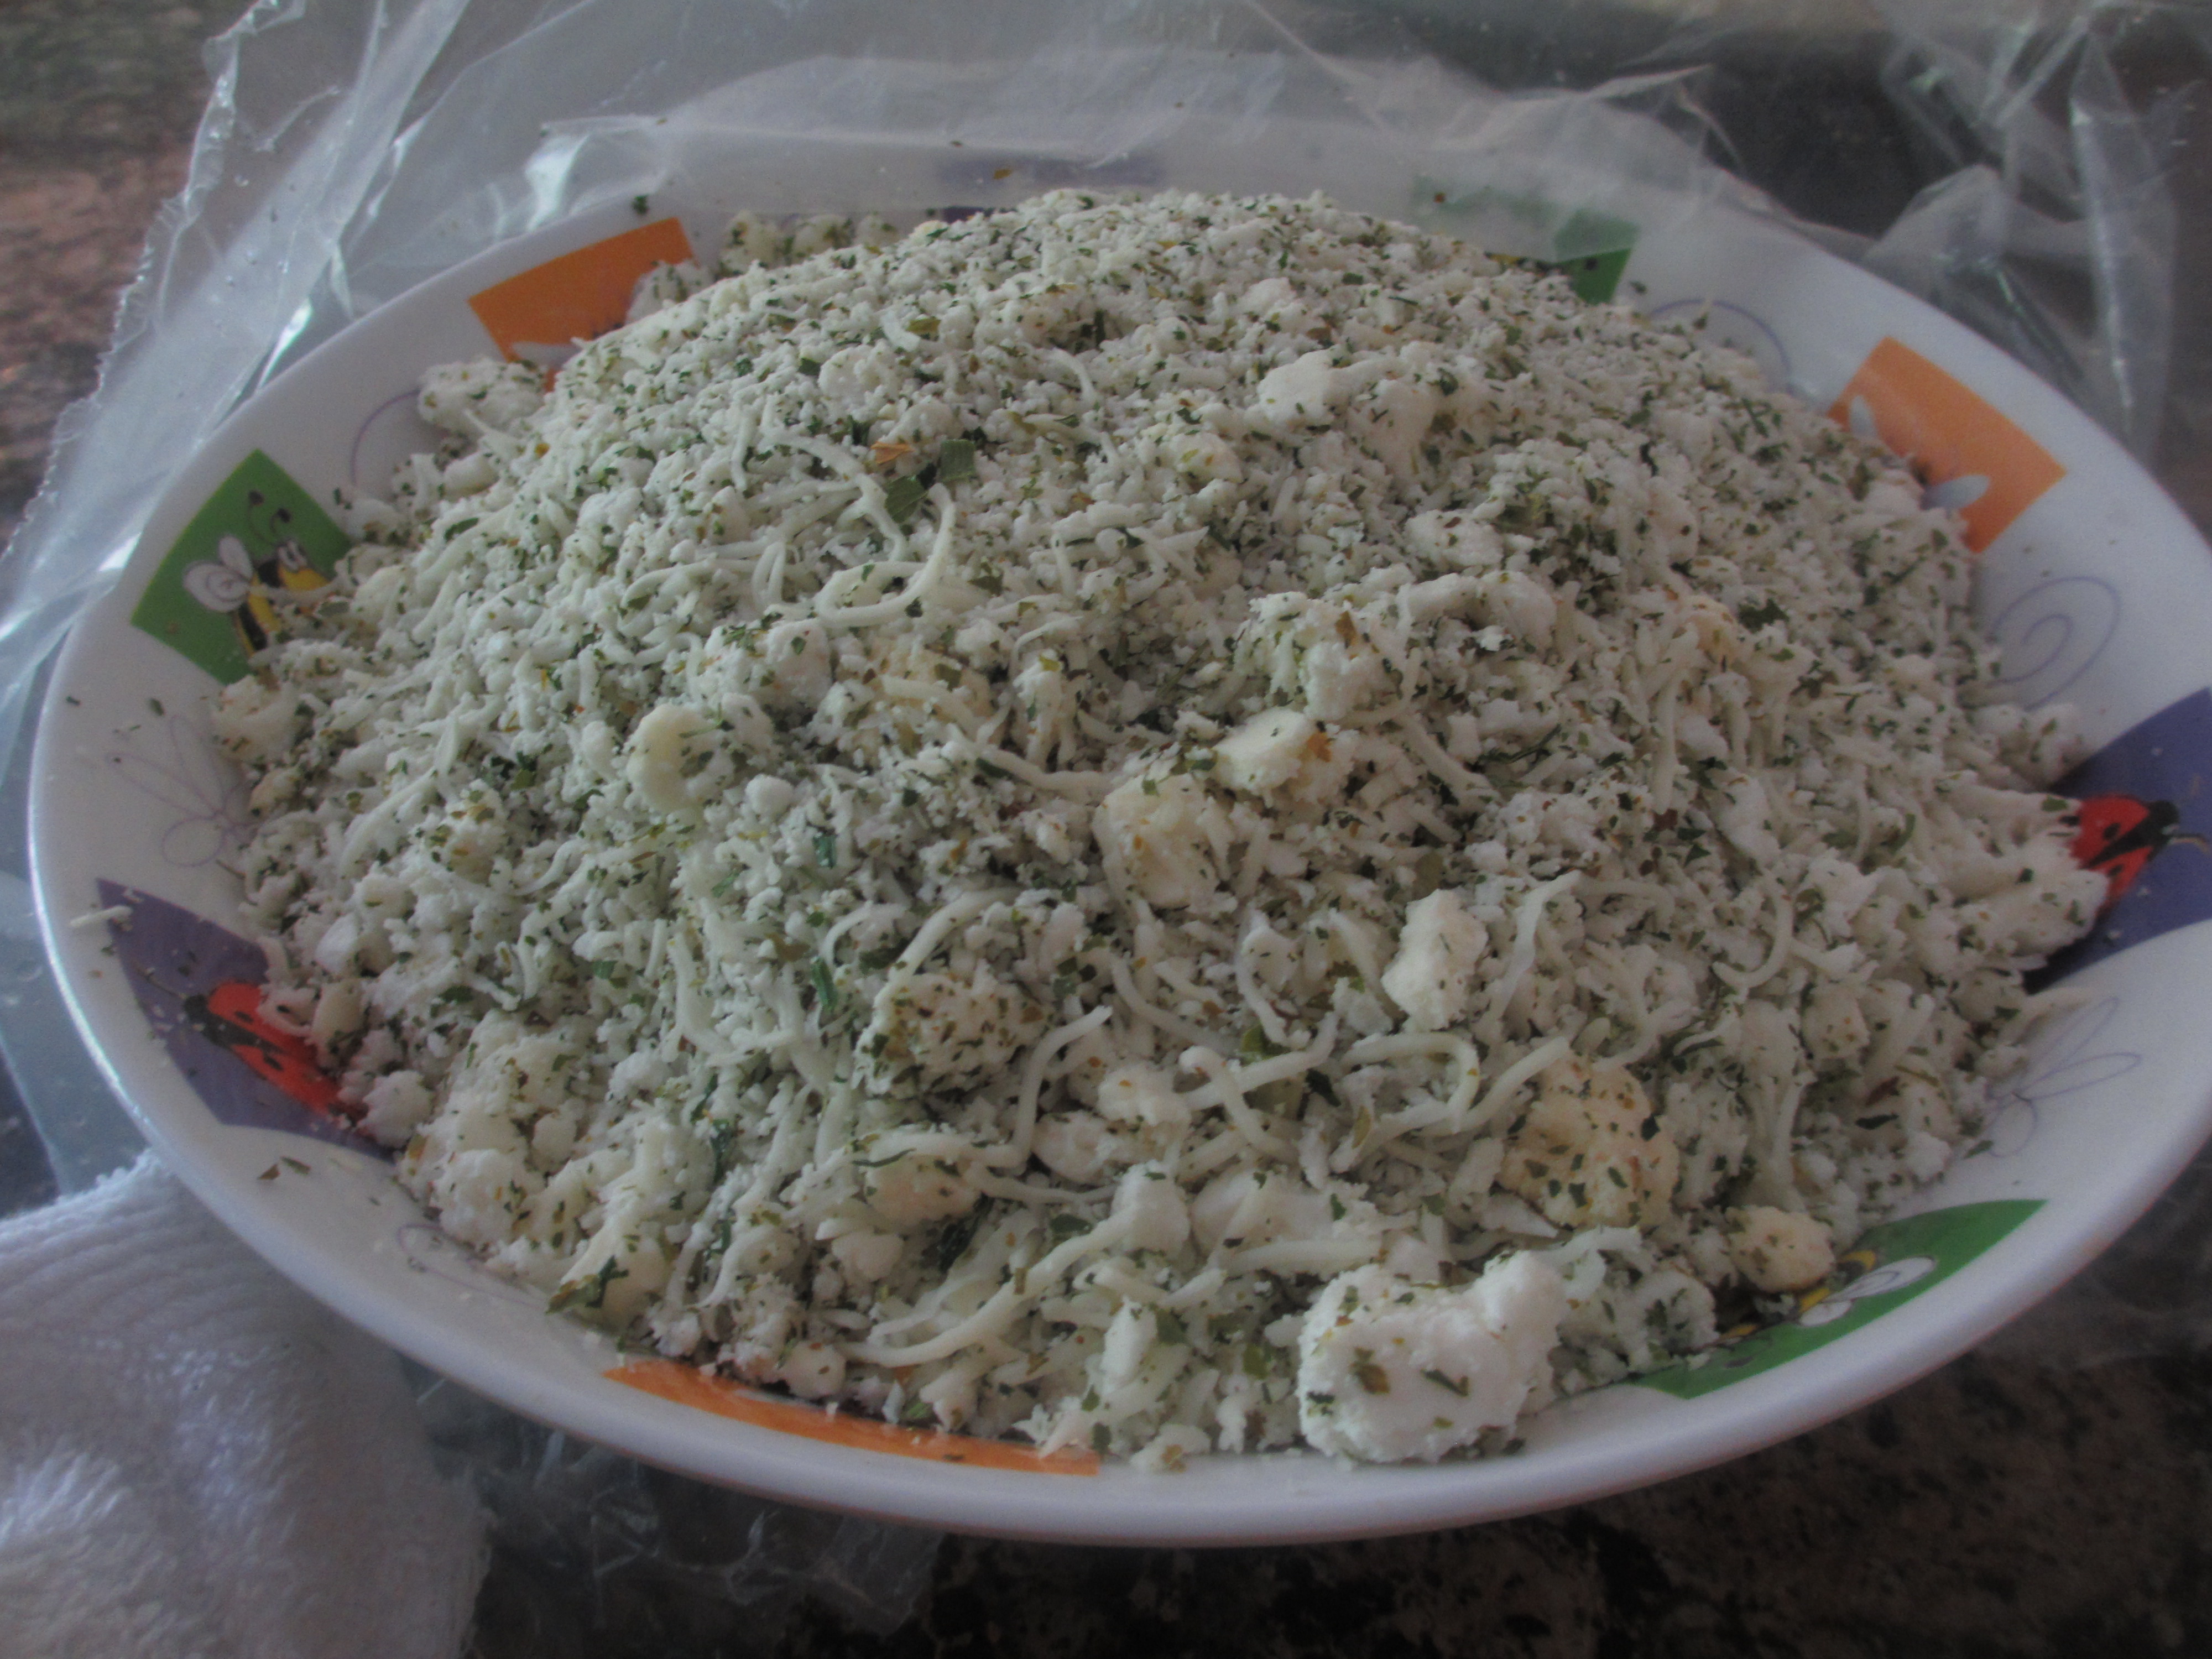 Cheeses mixed with parsley in a bowl